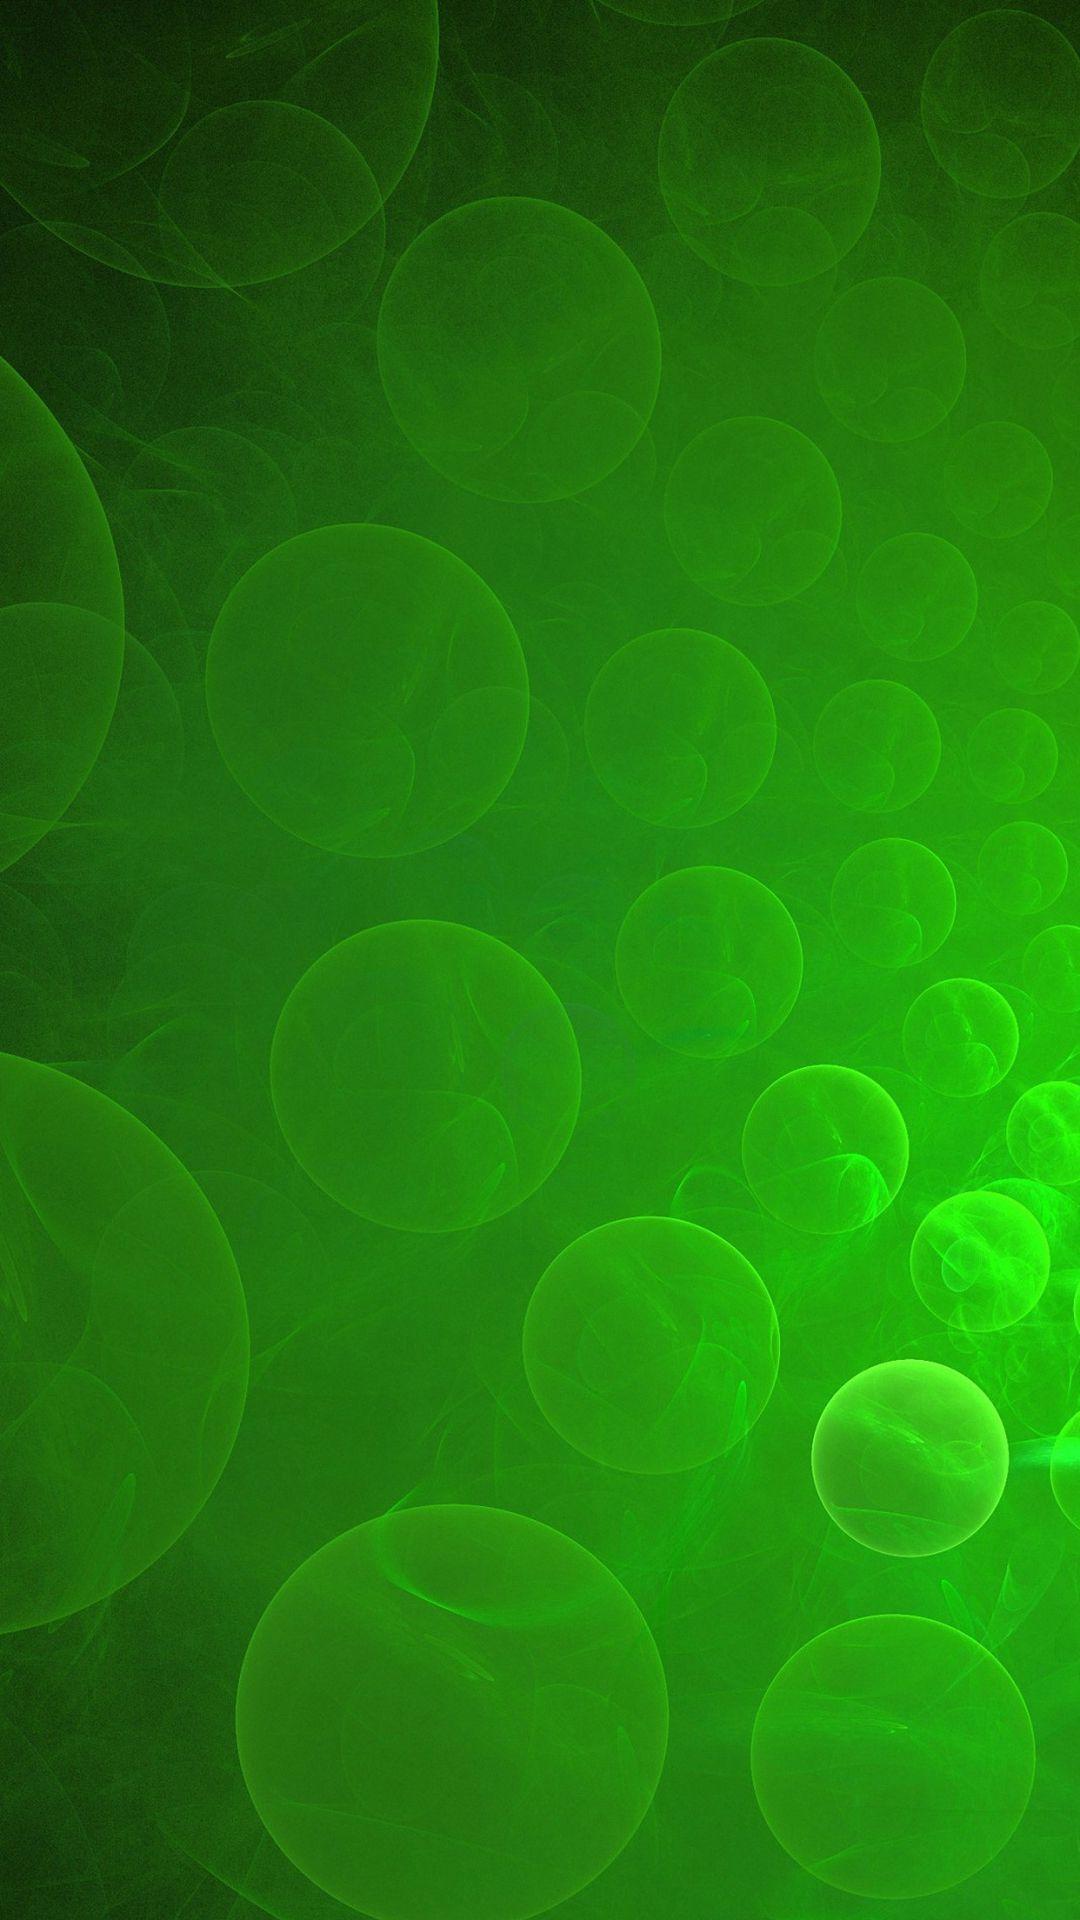 Abstract Green Iphone Wallpapers Top Free Abstract Green Iphone Backgrounds Wallpaperaccess